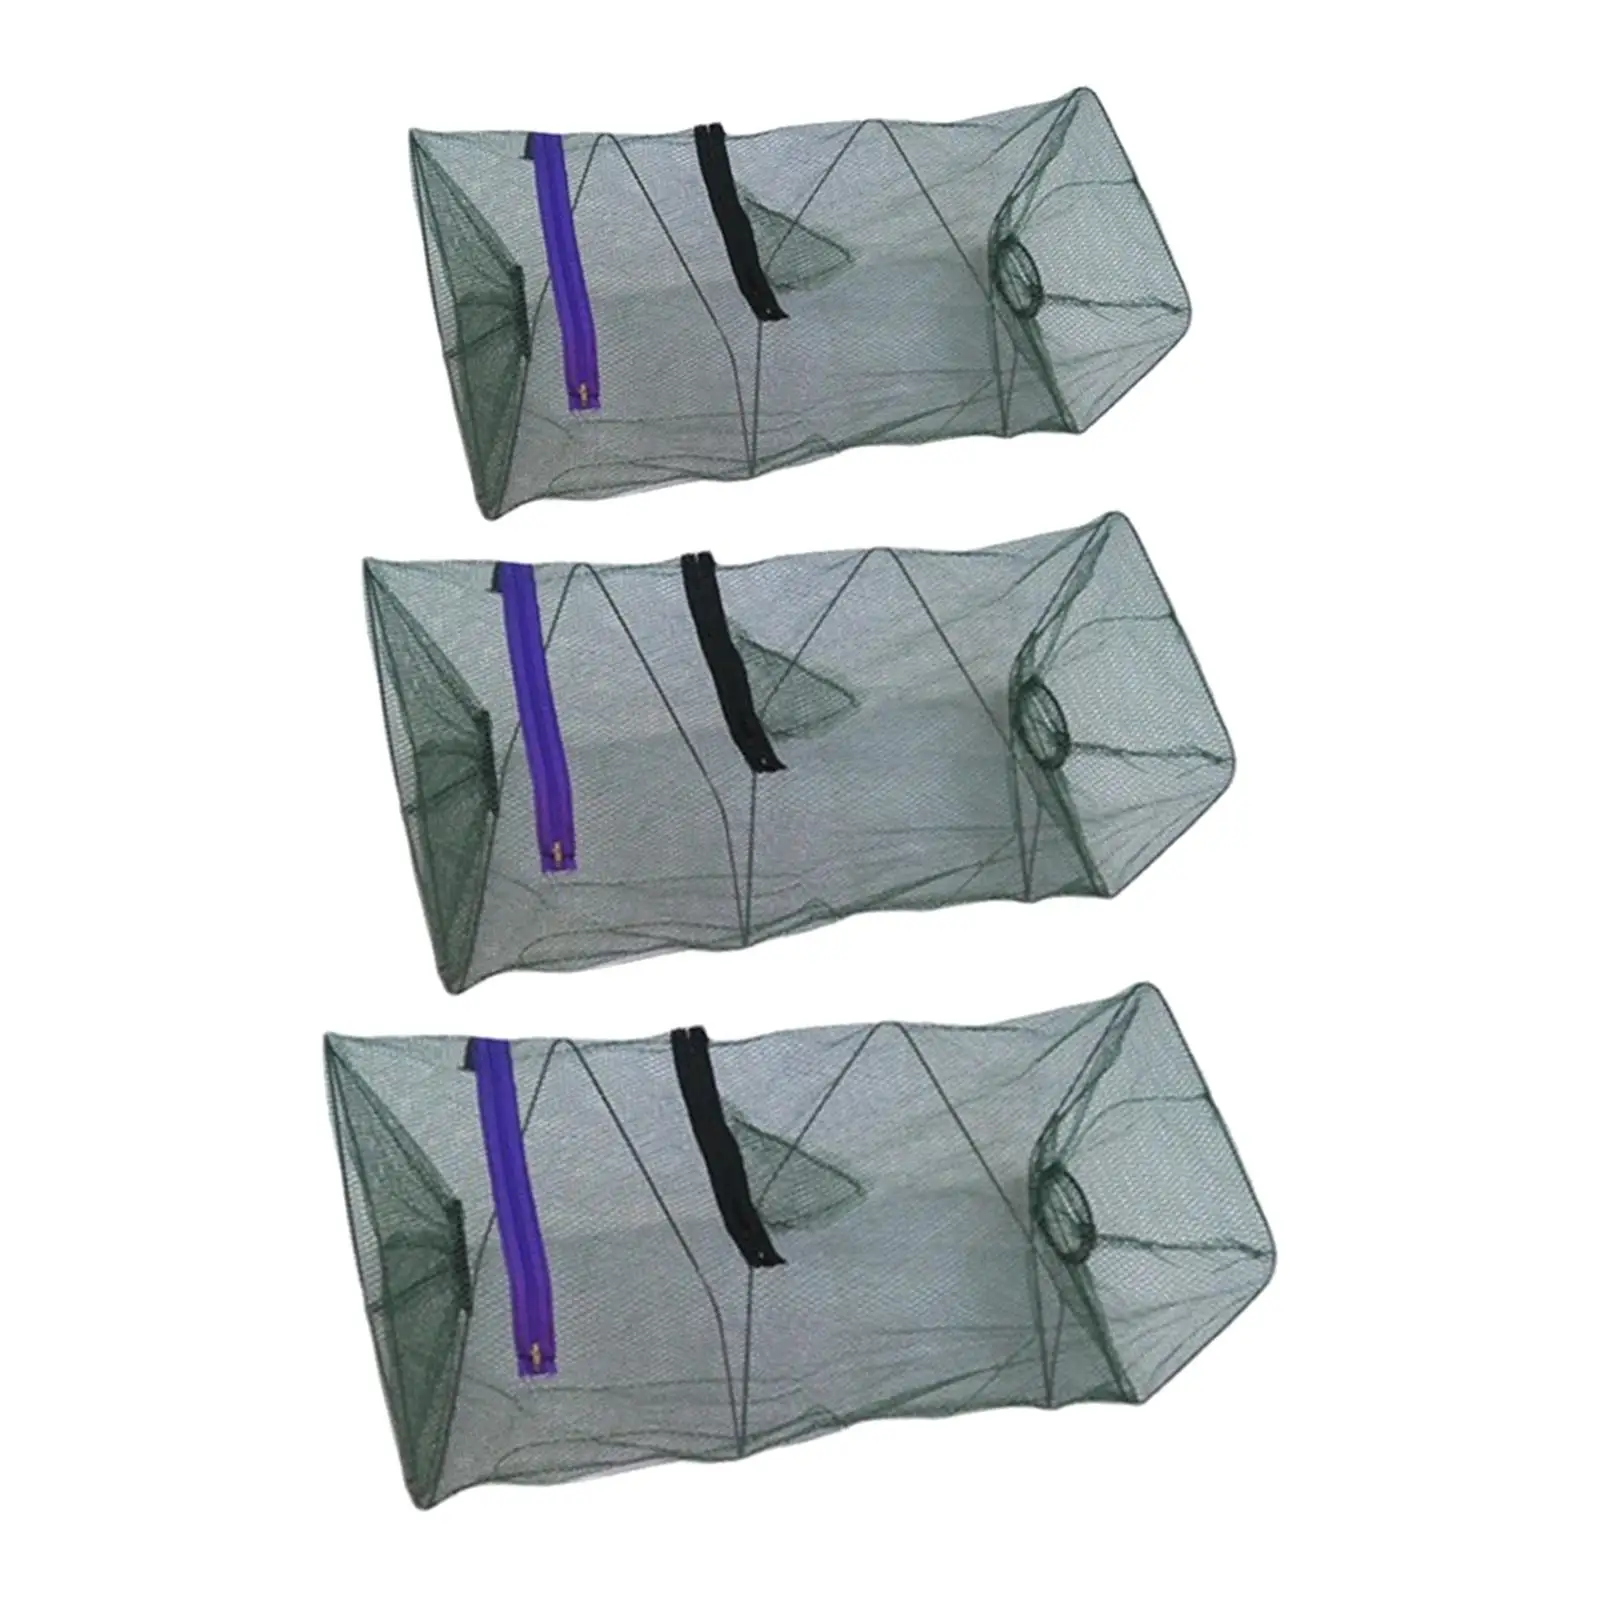 Fishing Net Fodable Convenient Net for Outdoor Fishing